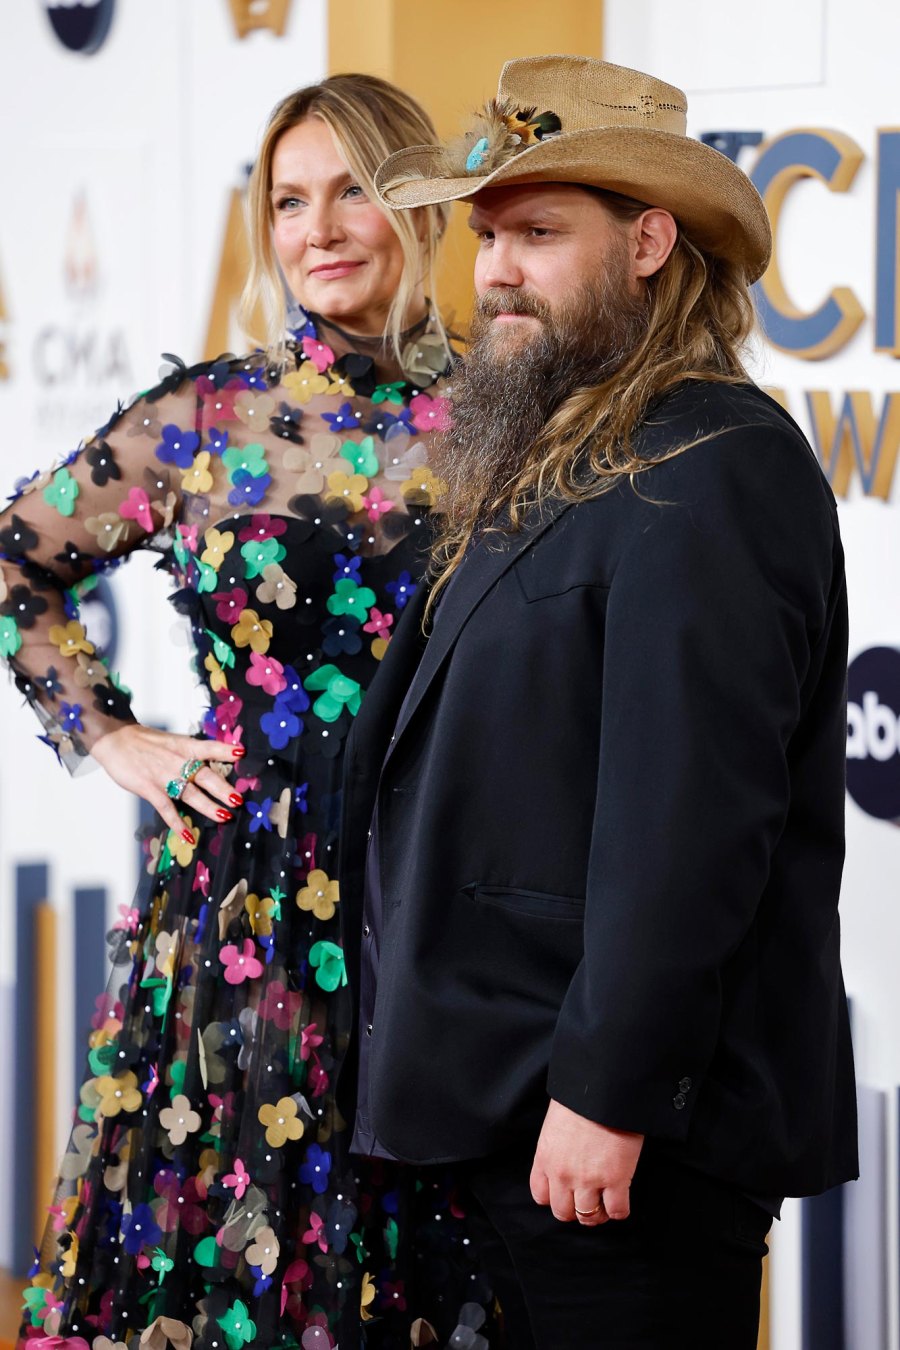 The Cutest Country Music Couples at the 2023 CMA Awards Chris Stapleton and Morgane Stapleton More 396